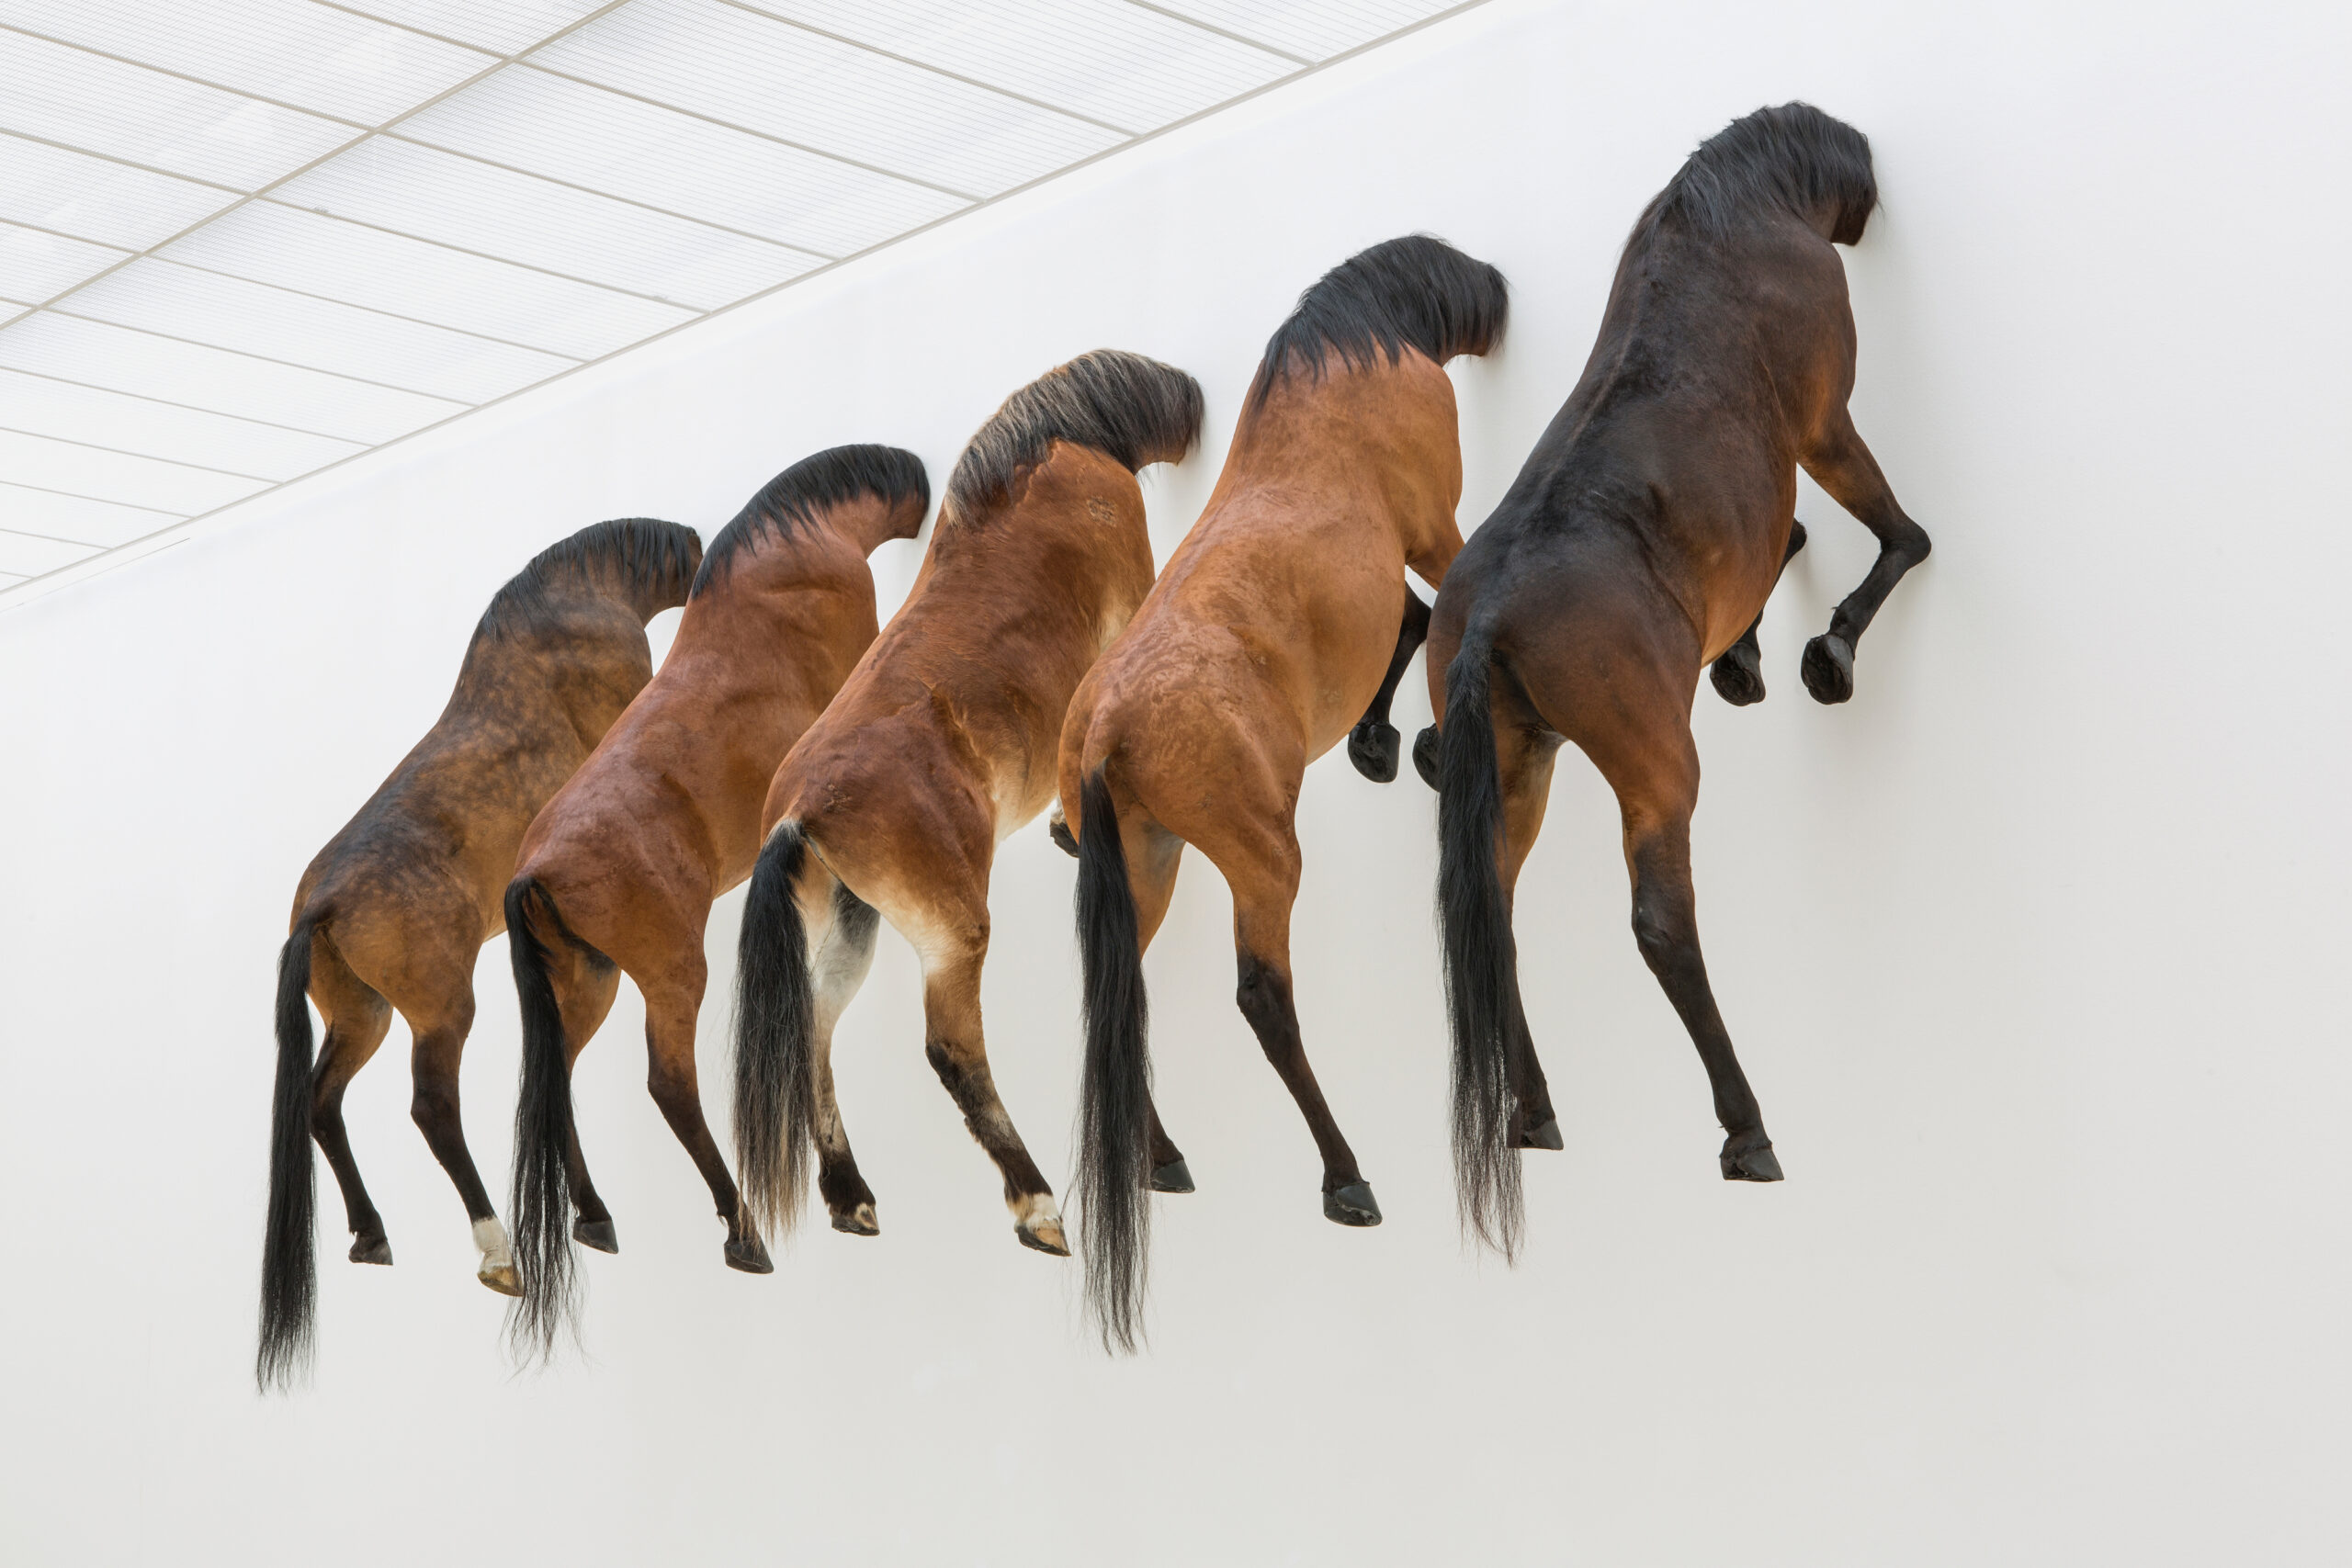 Maurizio Cattelan, Kaputt, 2013, Taxidermied horses, Variable dimensions, Installation view, Fondation Beyeler, Basel, 2013